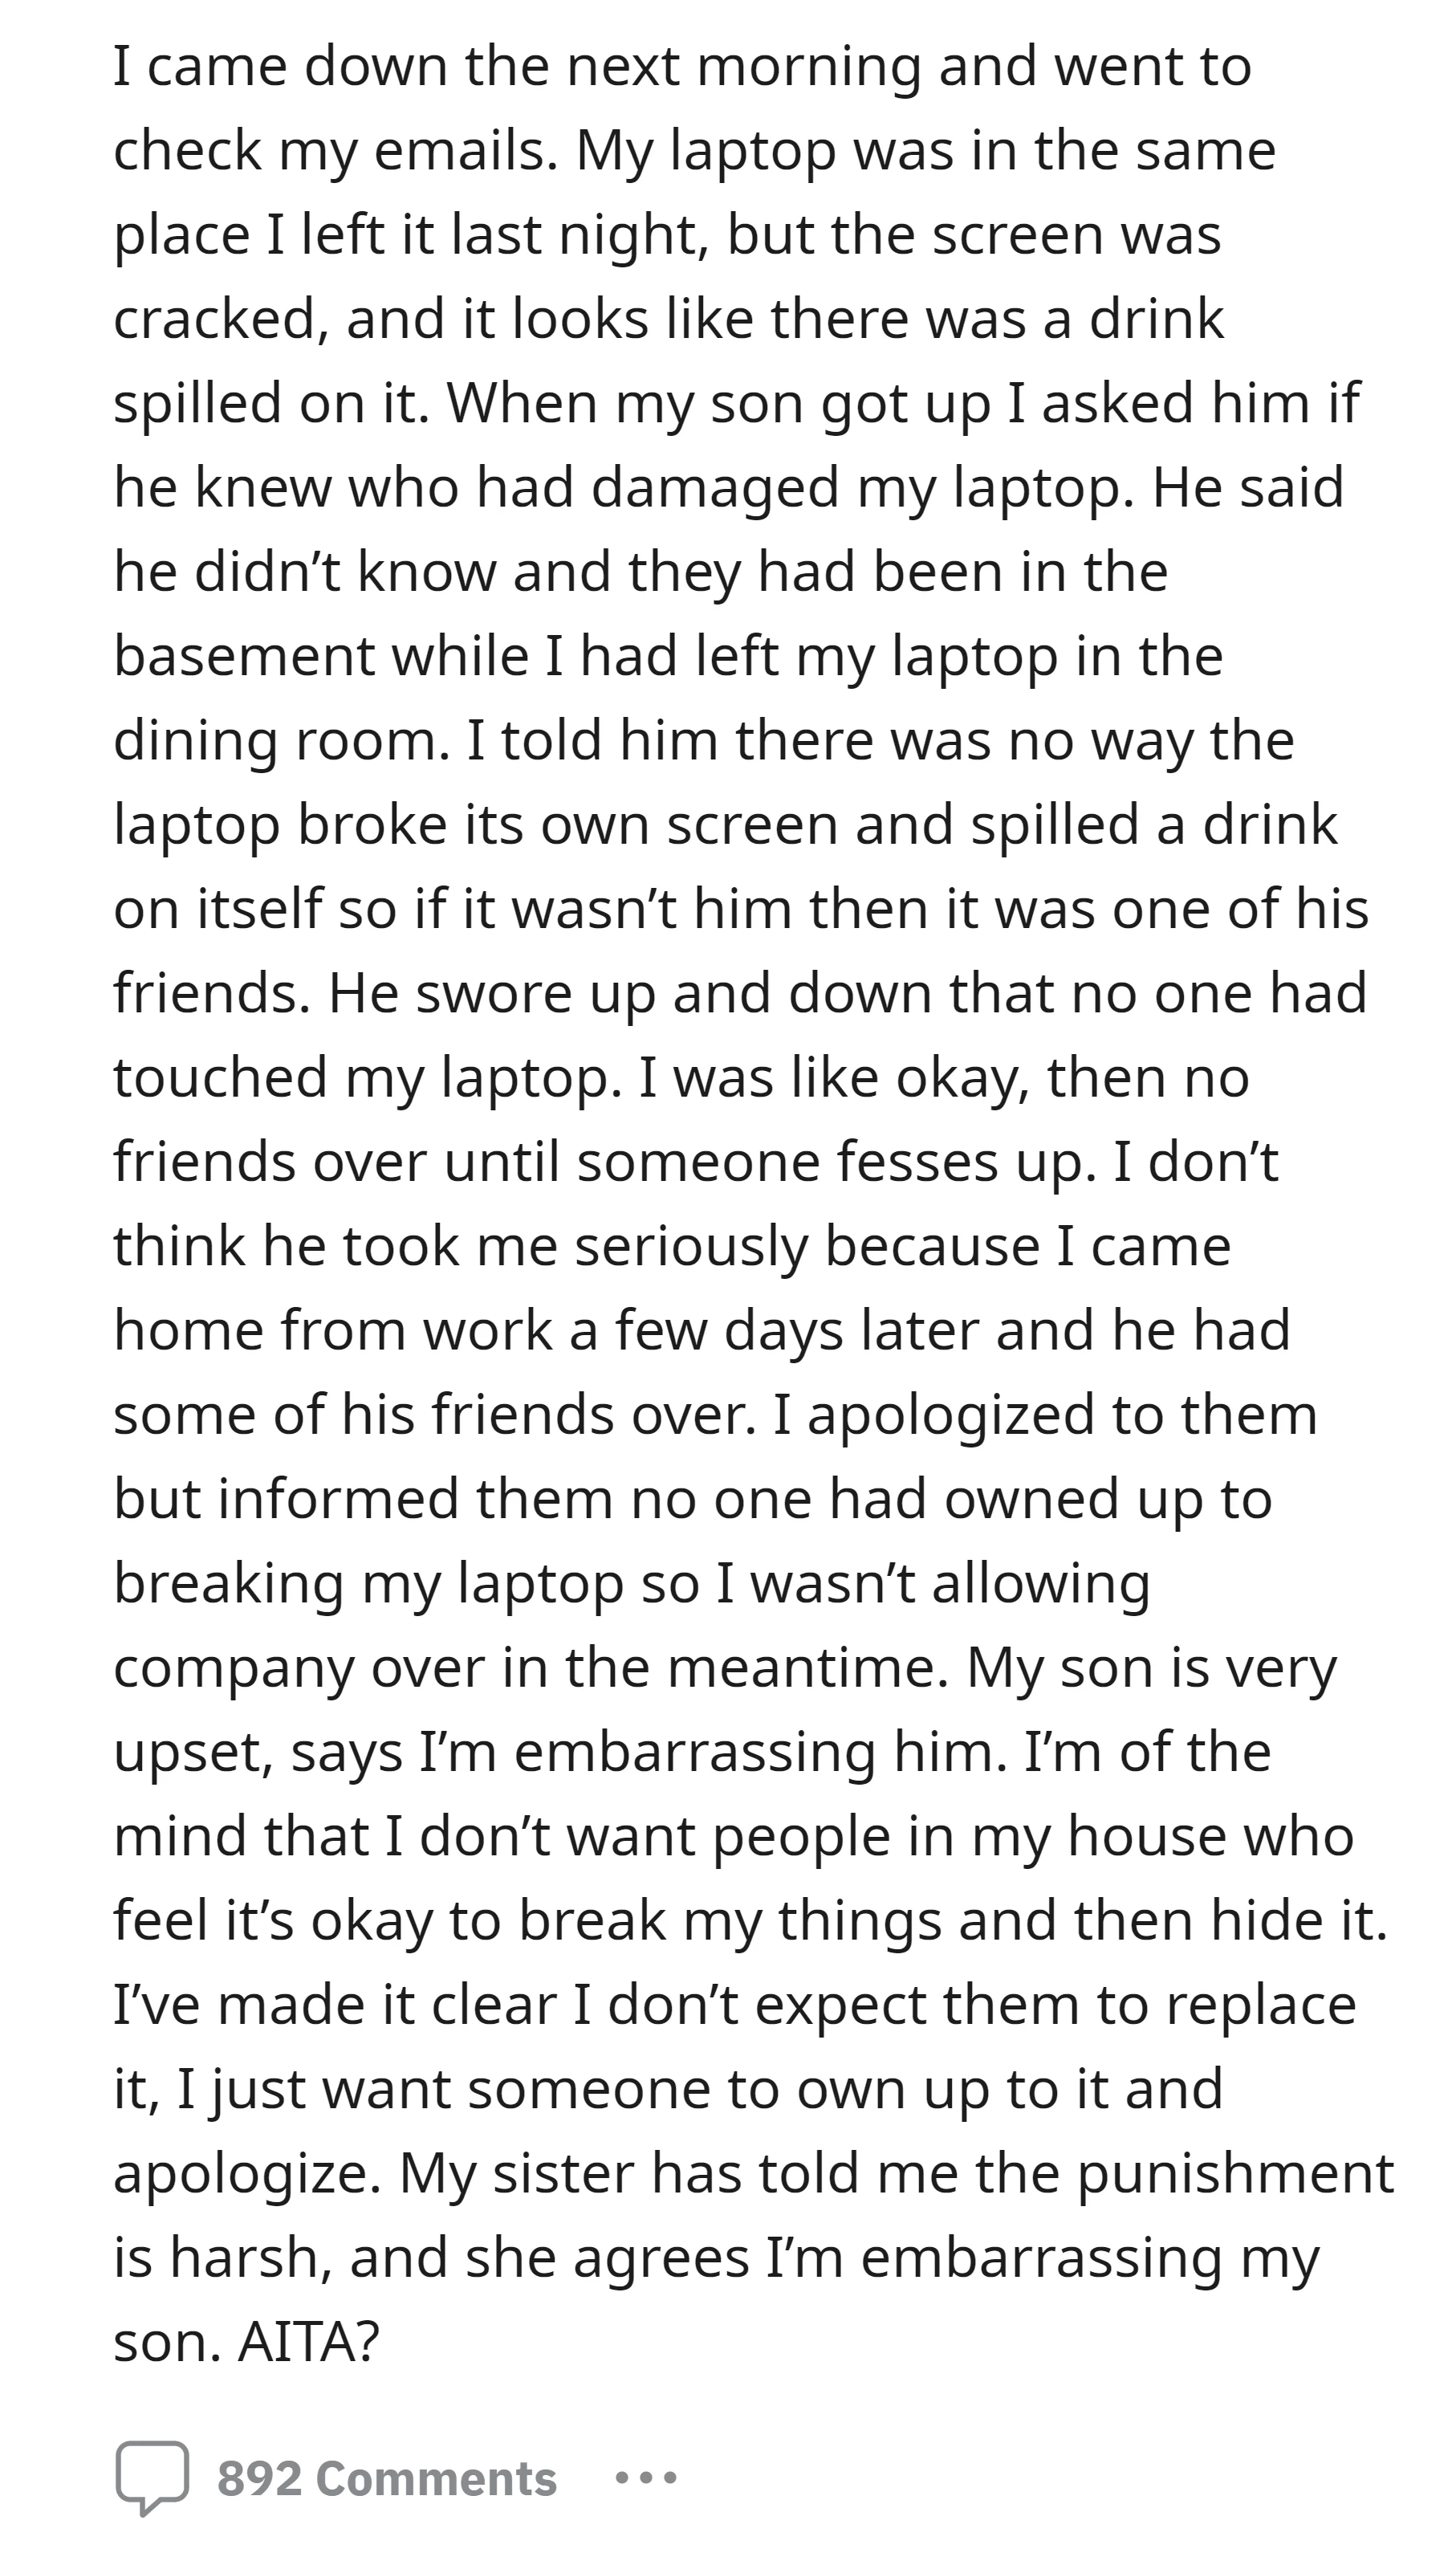 OP decided to ban his friends from the house